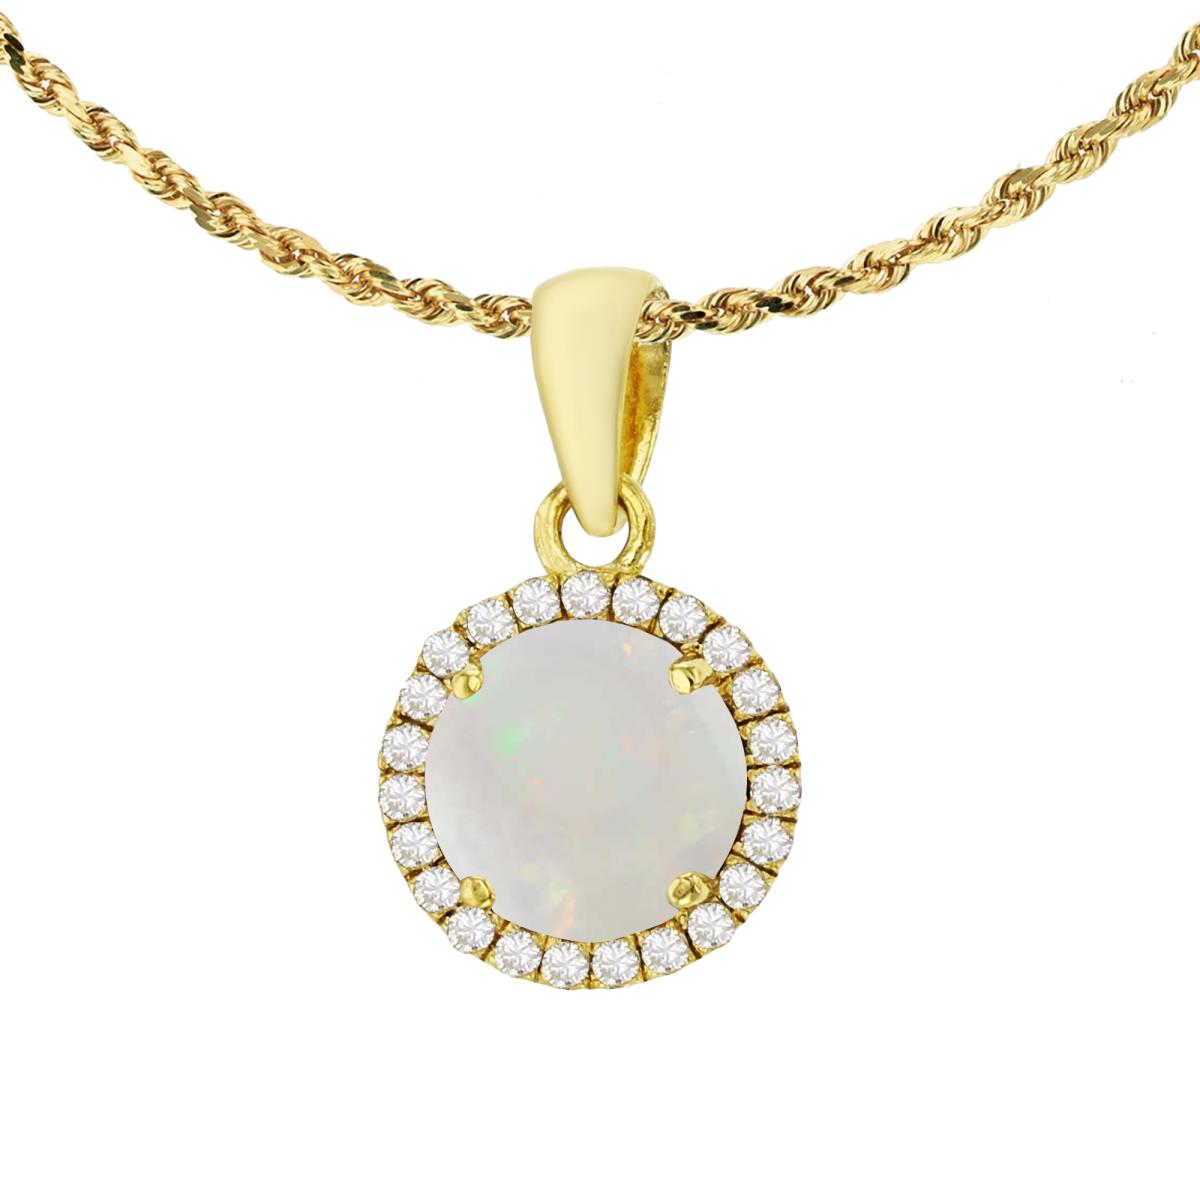 10K Yellow Gold 7mm Round Opal & 0.12 CTTW Diamond Halo 18" Rope Chain Necklace